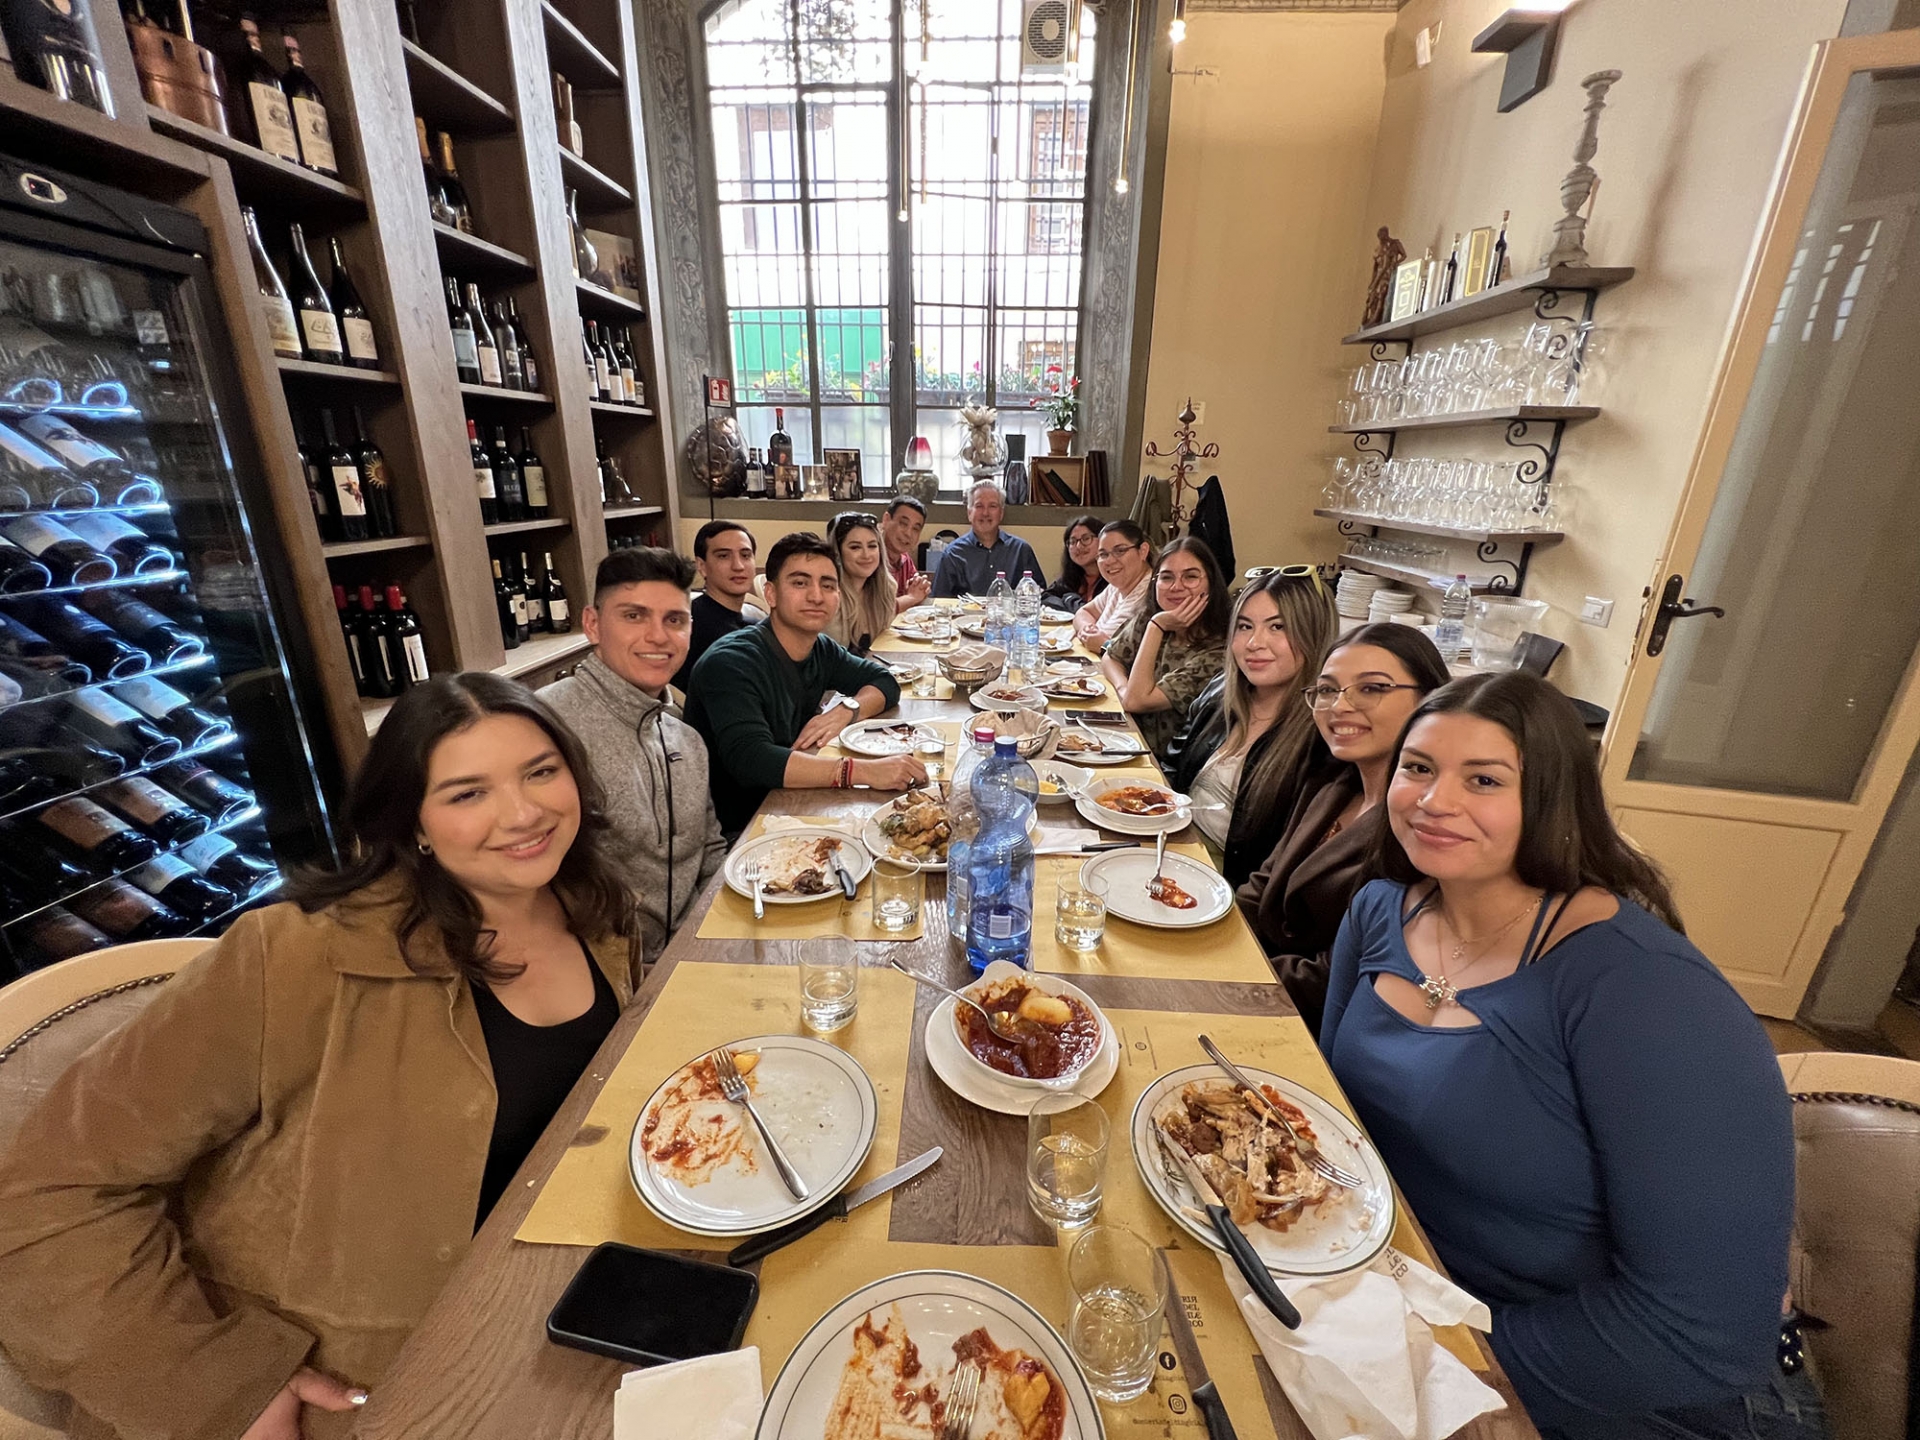 CSUSB hospitality management students share a meal during their trip to Italy.